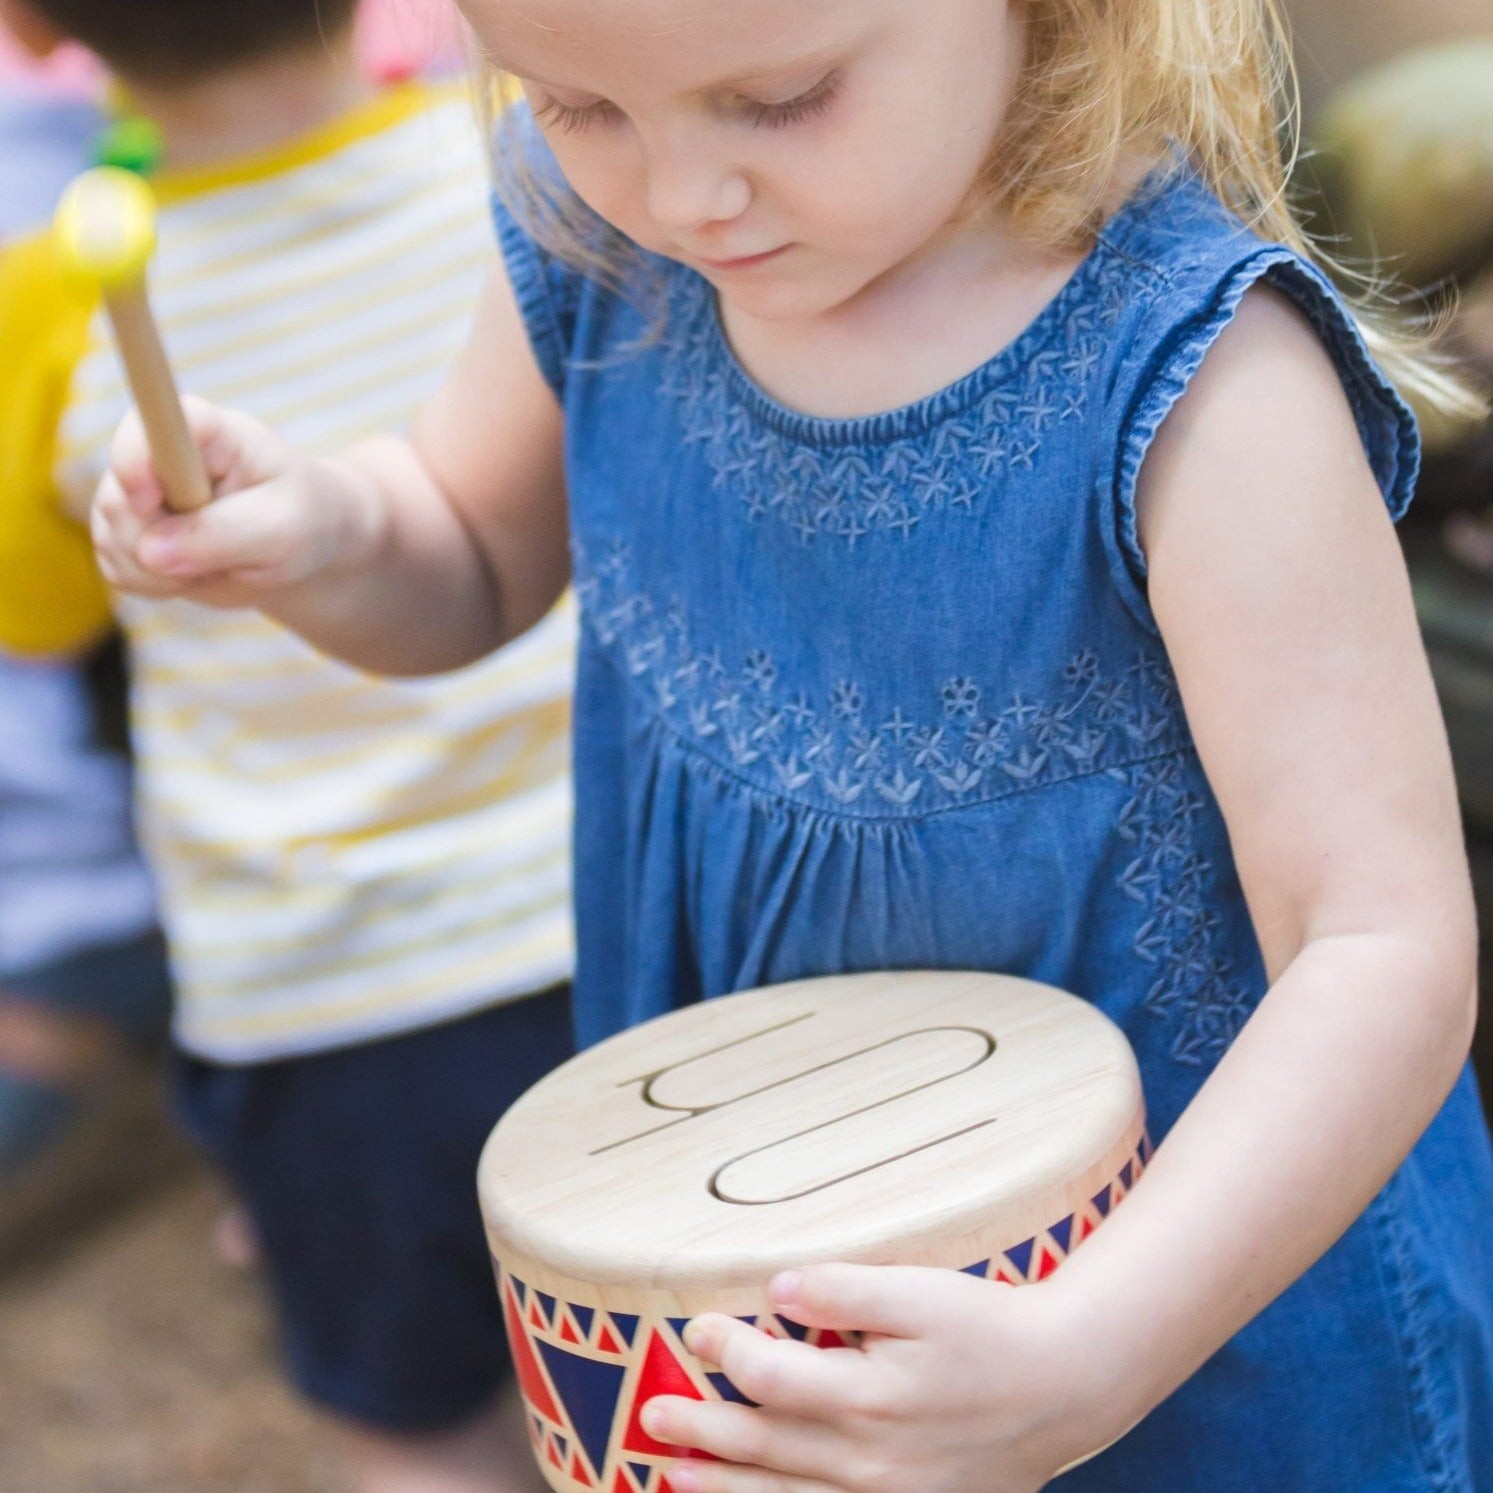 The Solid Drum is made from natural rubberwood and stained with non-toxic water-based pigments. Free from harmful chemicals and sharp edges the toy is safe for all little ones.